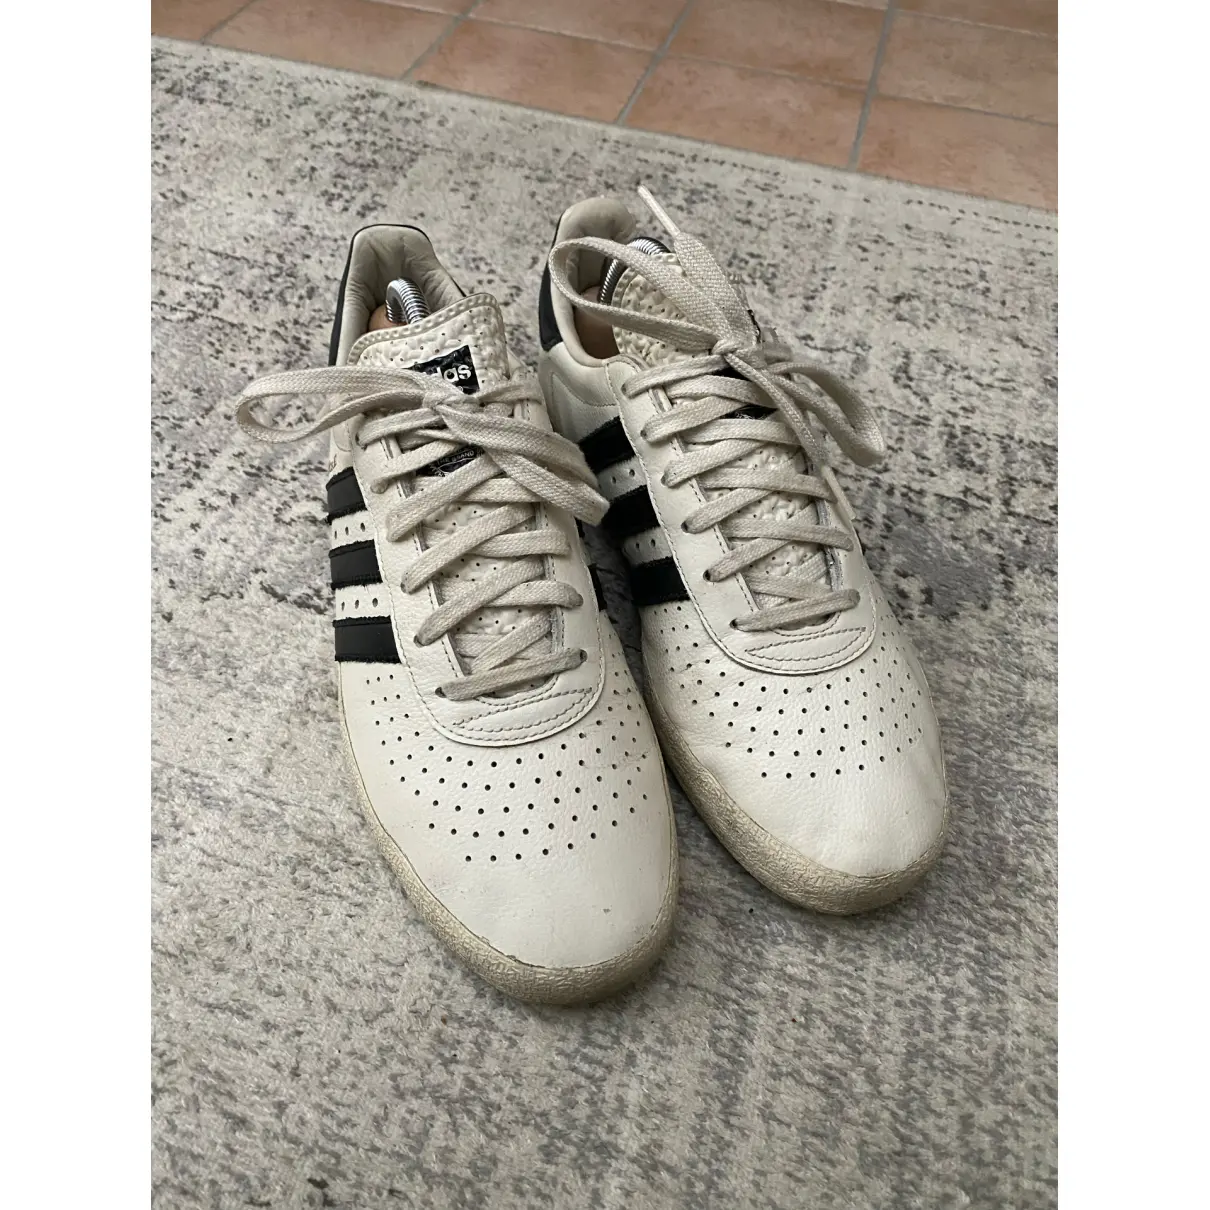 Buy Adidas Leather low trainers online